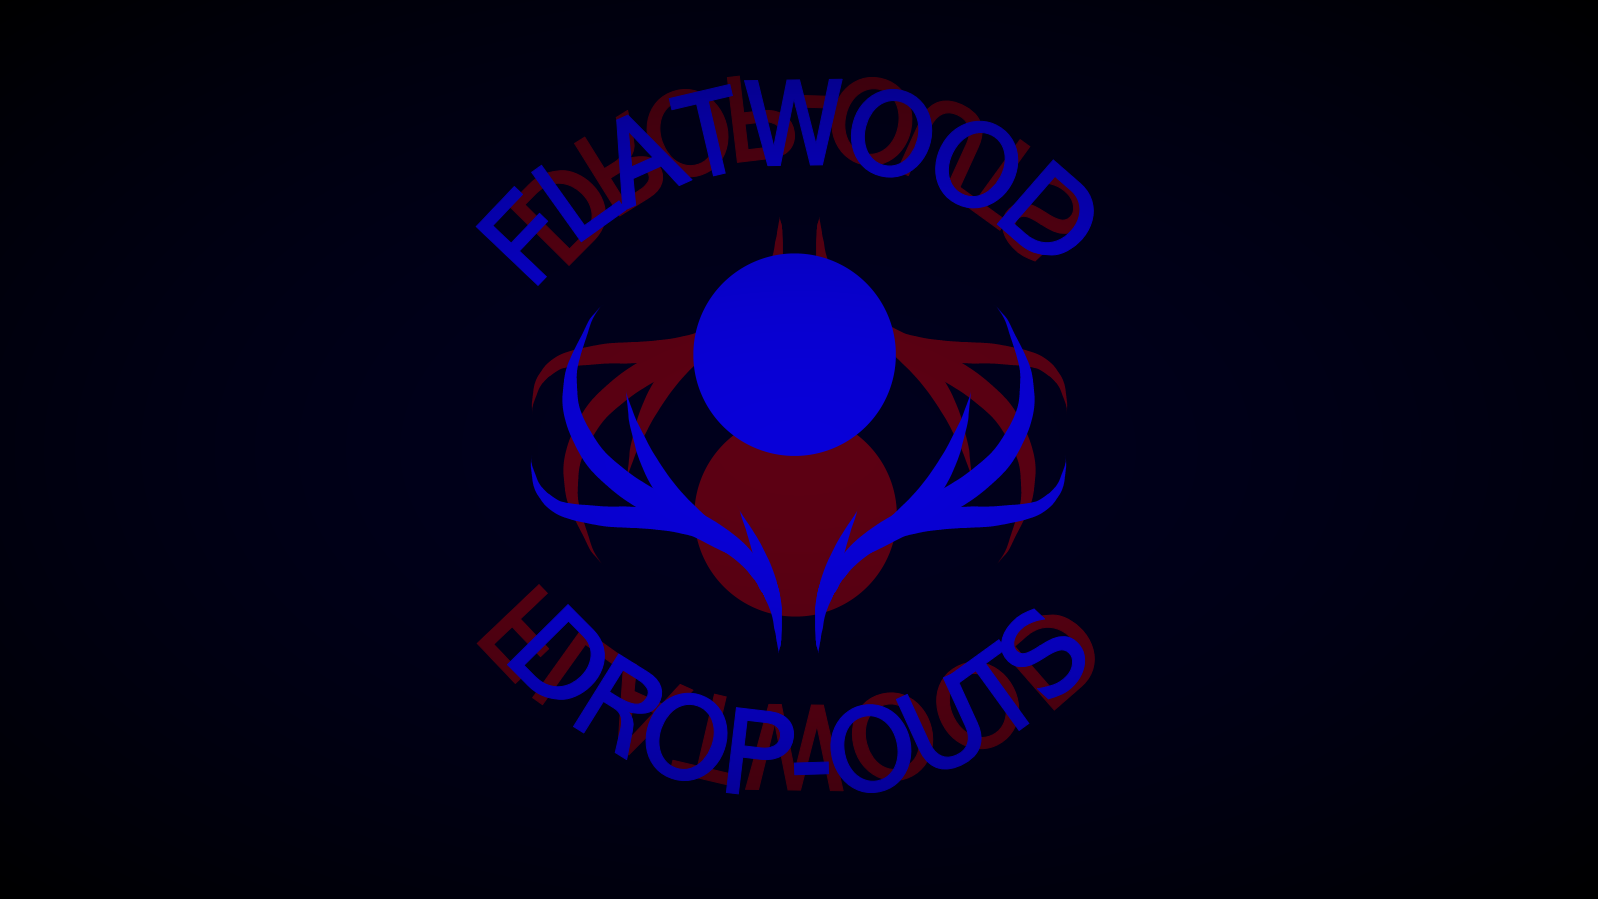 Flatwood Drop-Outs